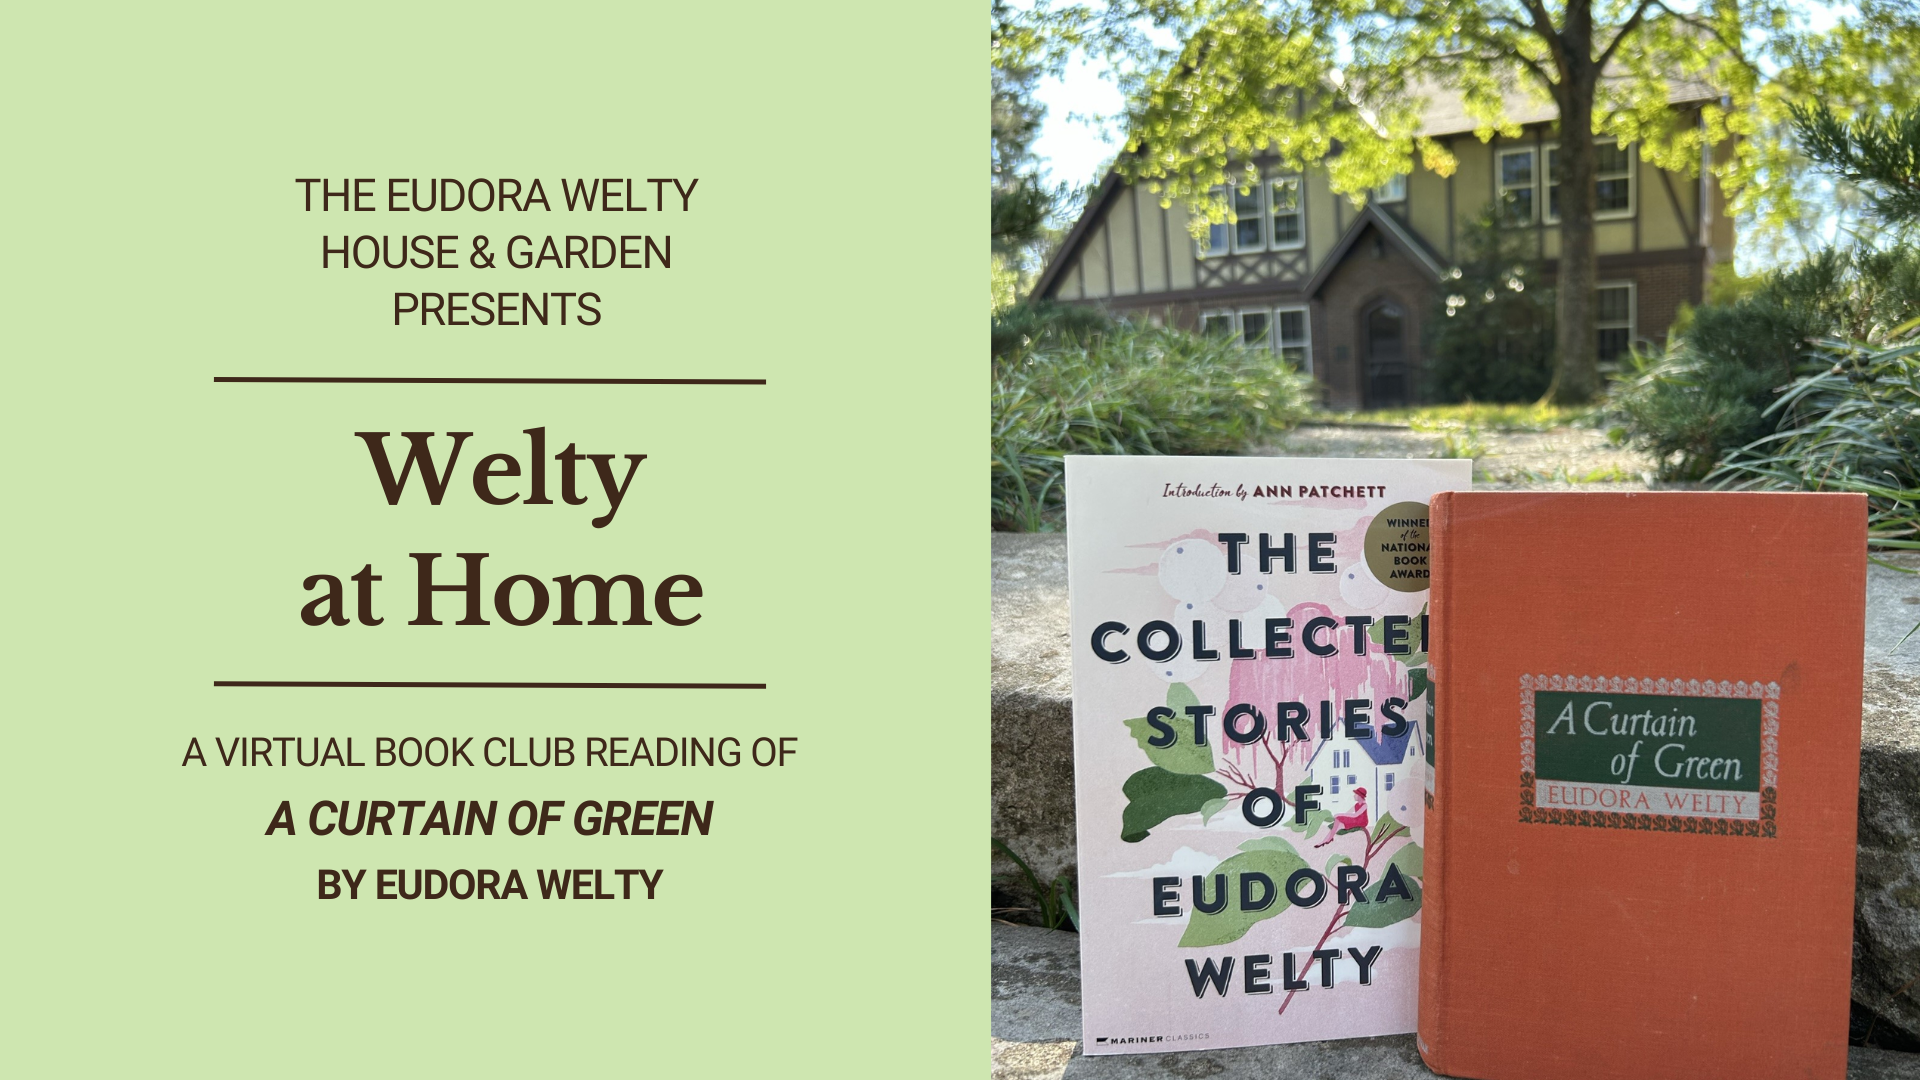 Welty at Home text graphic beside photo of two Welty books in front of Welty House